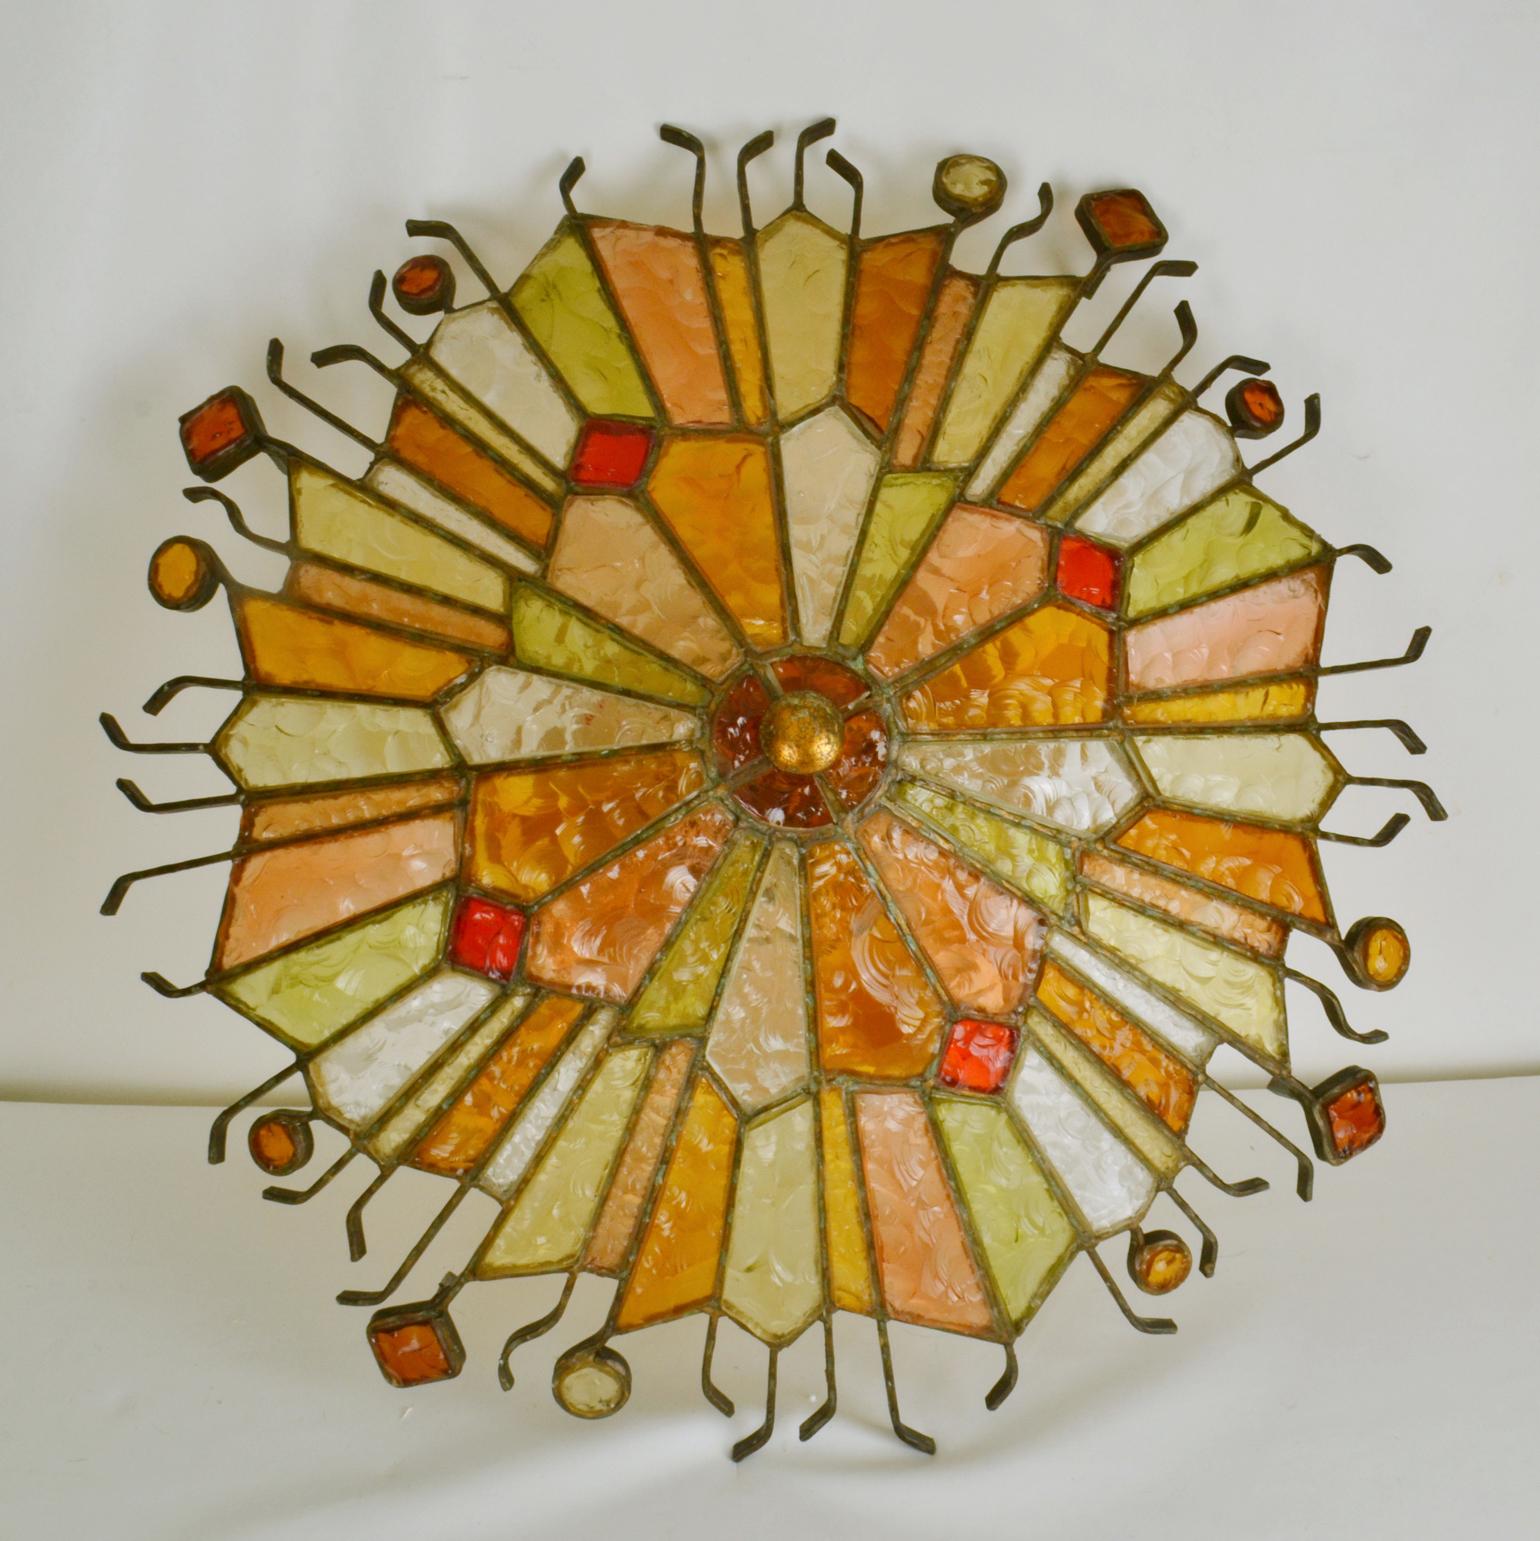 Large flush mount ceiling lamp by Poliarte in Verona, Italy, circa 1975. The lamp radiates in geometric segments of alternating translucent and colored hand chipped glass creating a circular relief to break the light, in amber, red, orange, peach